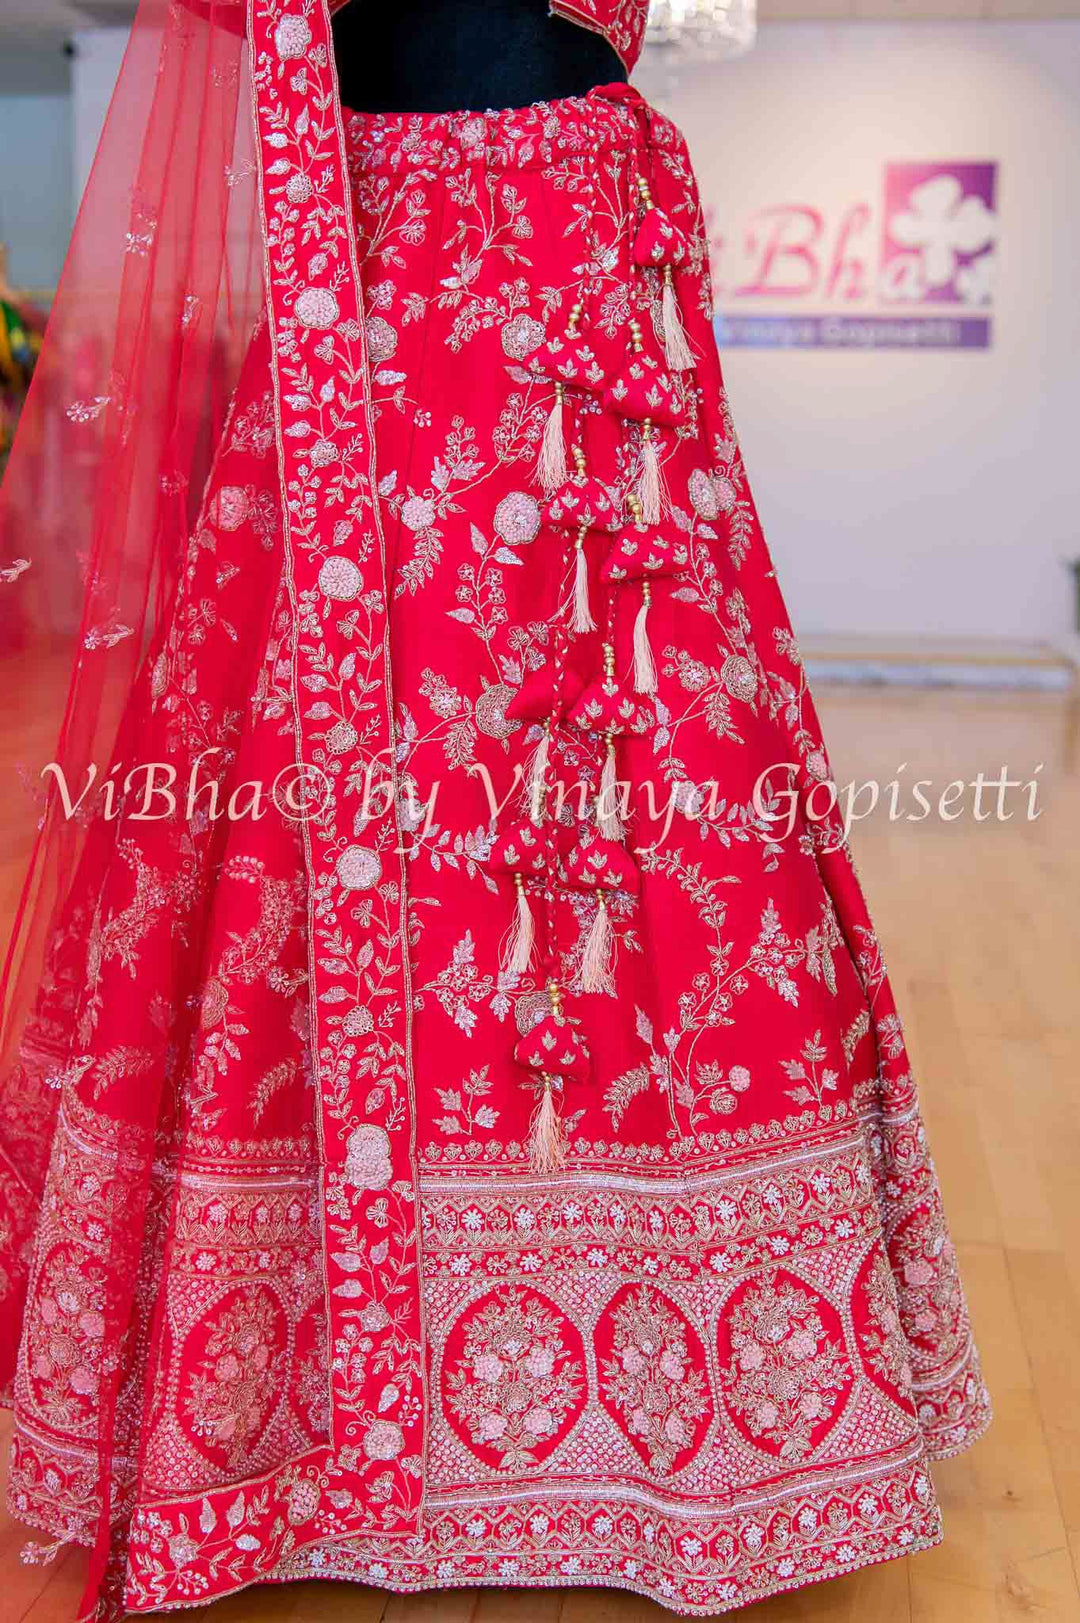 Accessories & Jewelry - Scarlet Red Raw Silk Lehenga Blouse With Heavy Resham And Zardosi Embroidery